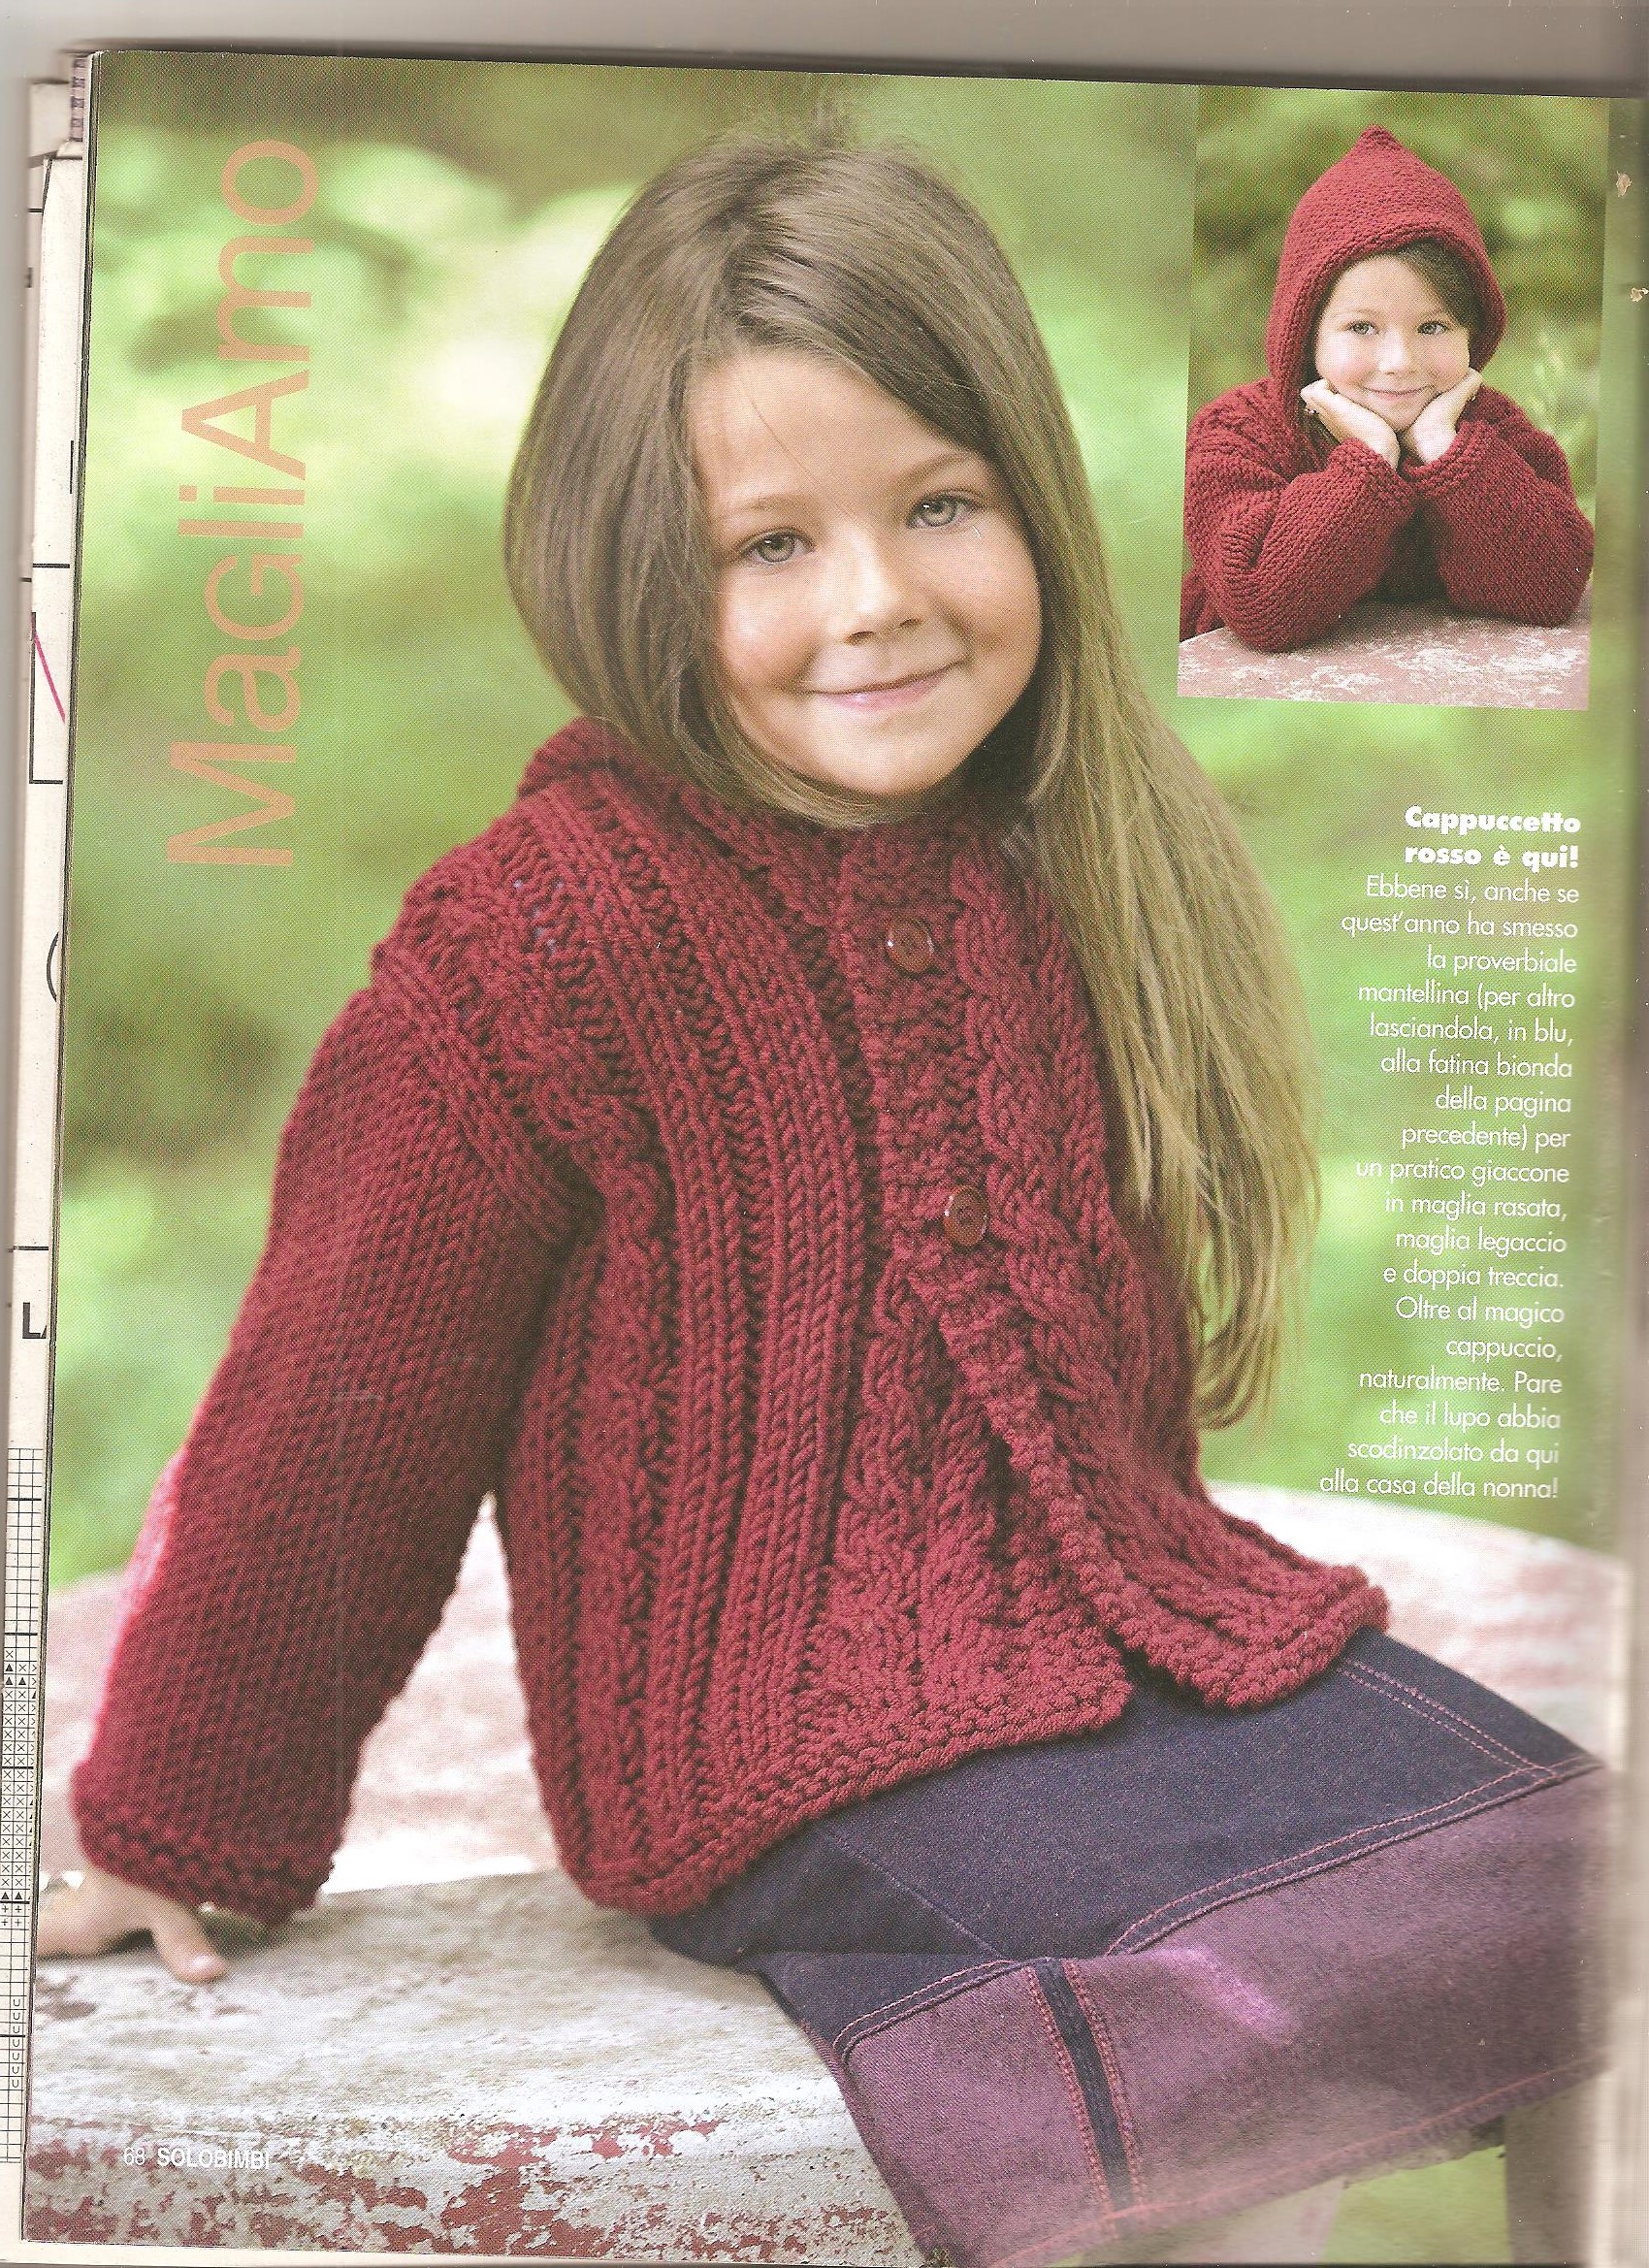 Red jacket knitted for kids knitting pattern (1)